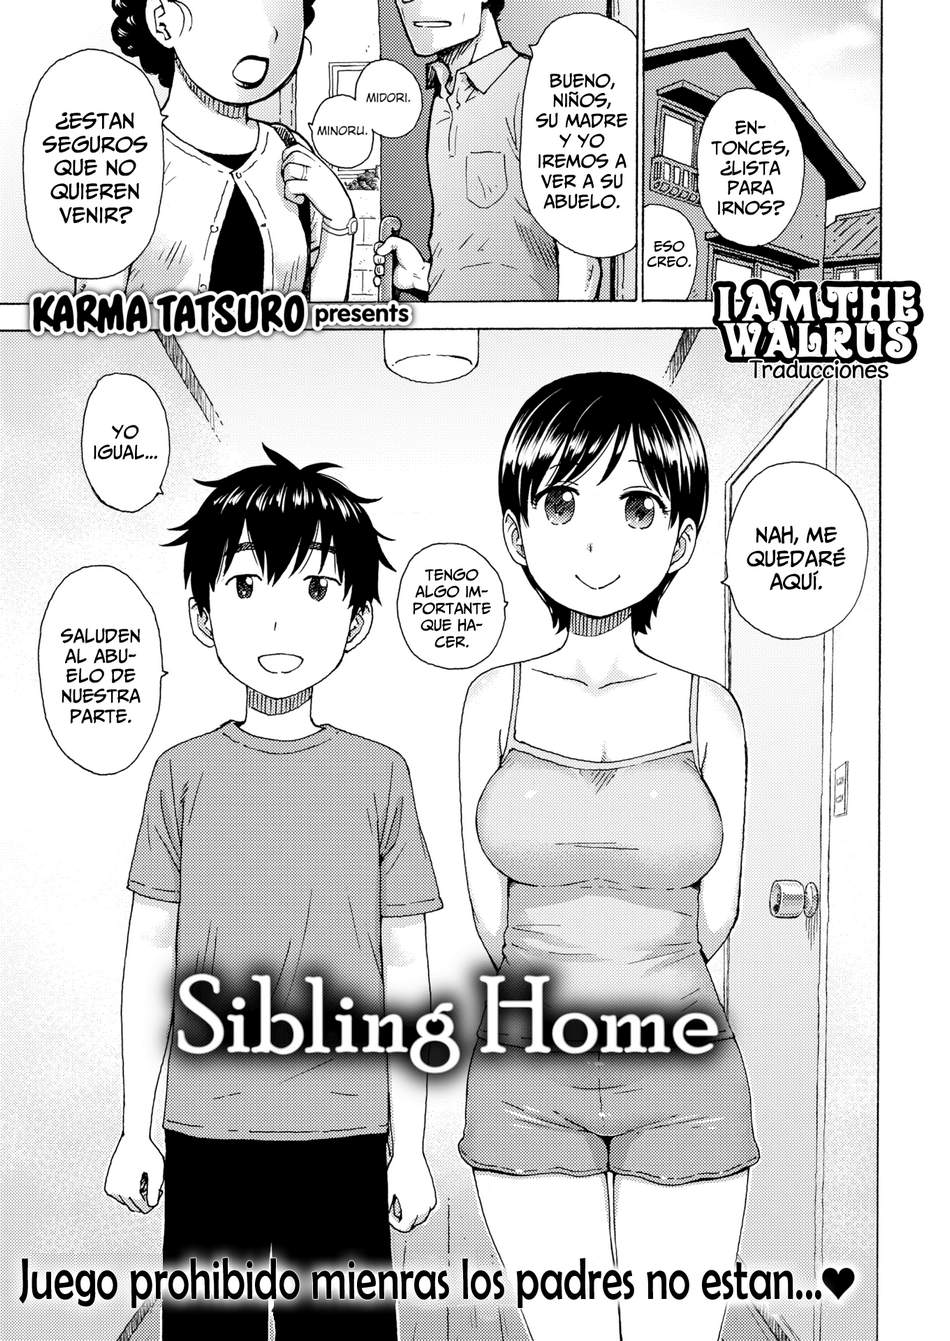 Sibling Home - Page #1